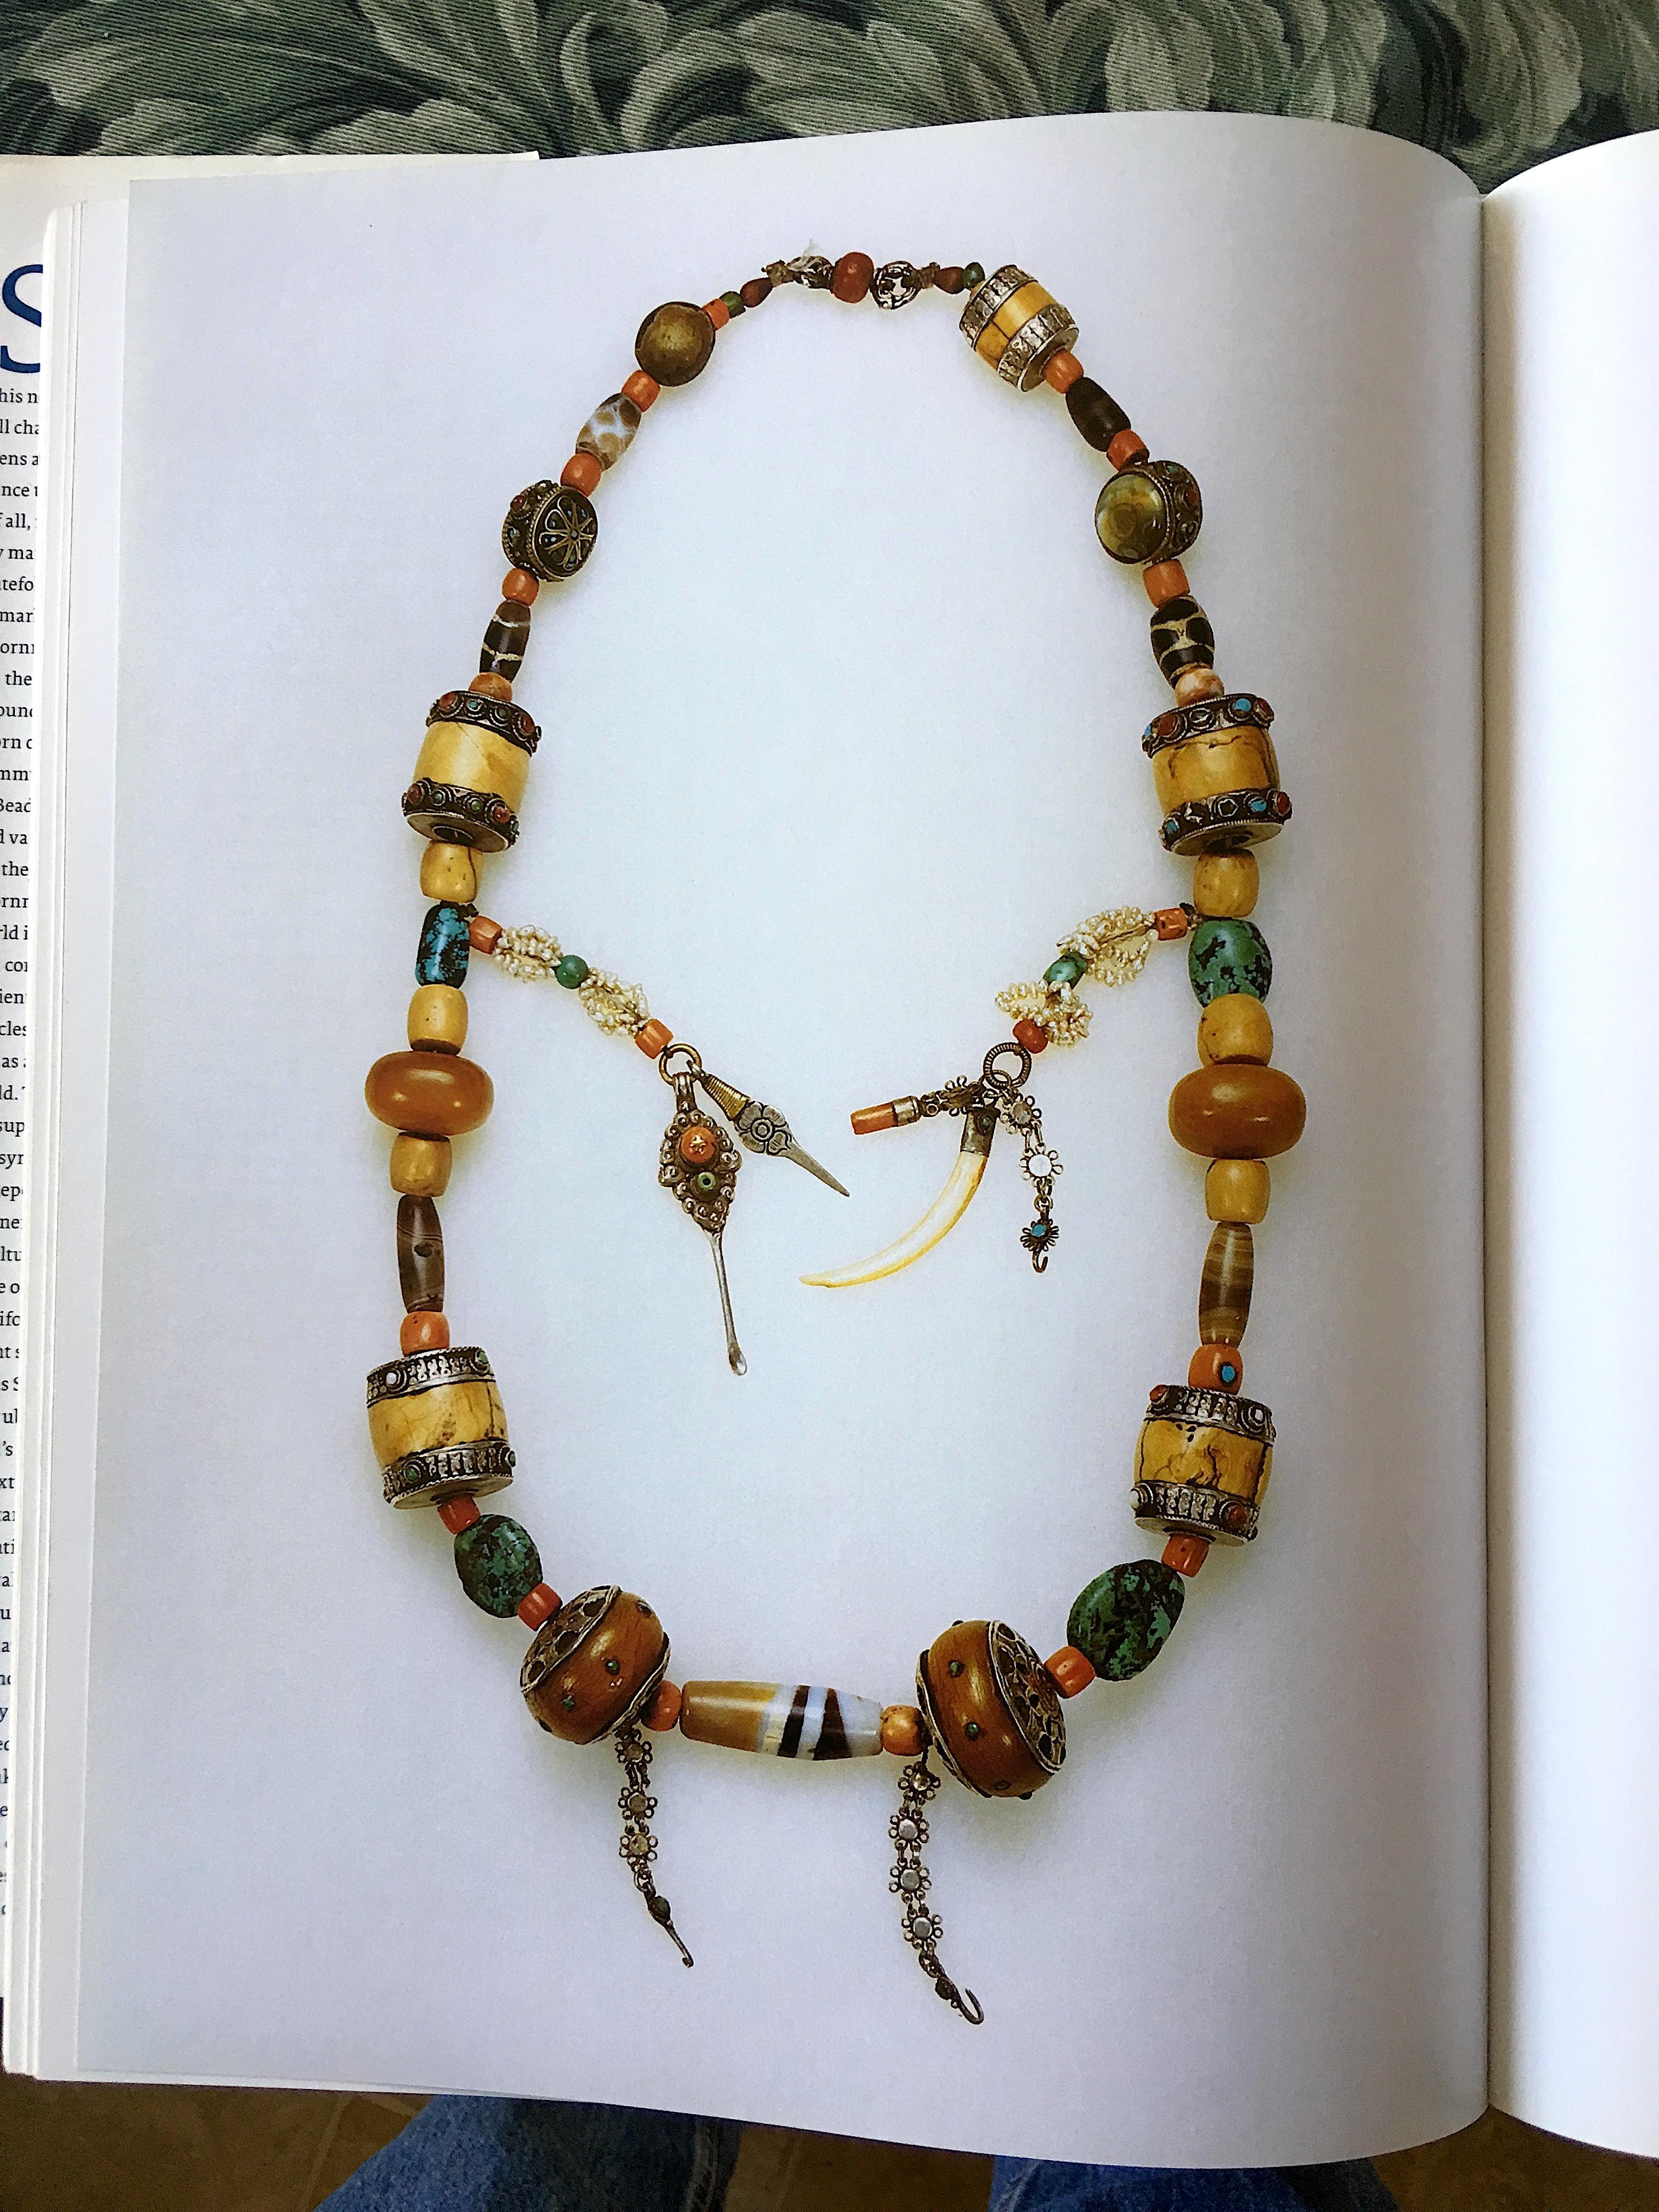 Store closing March 31. Last chance clearance sale.  Provenance: This necklace was formerly in the collection of Ivory Freidus—a well-known art collector from New York (now deceased). In 1989 she was credited by the Oriental Rug Review as having one